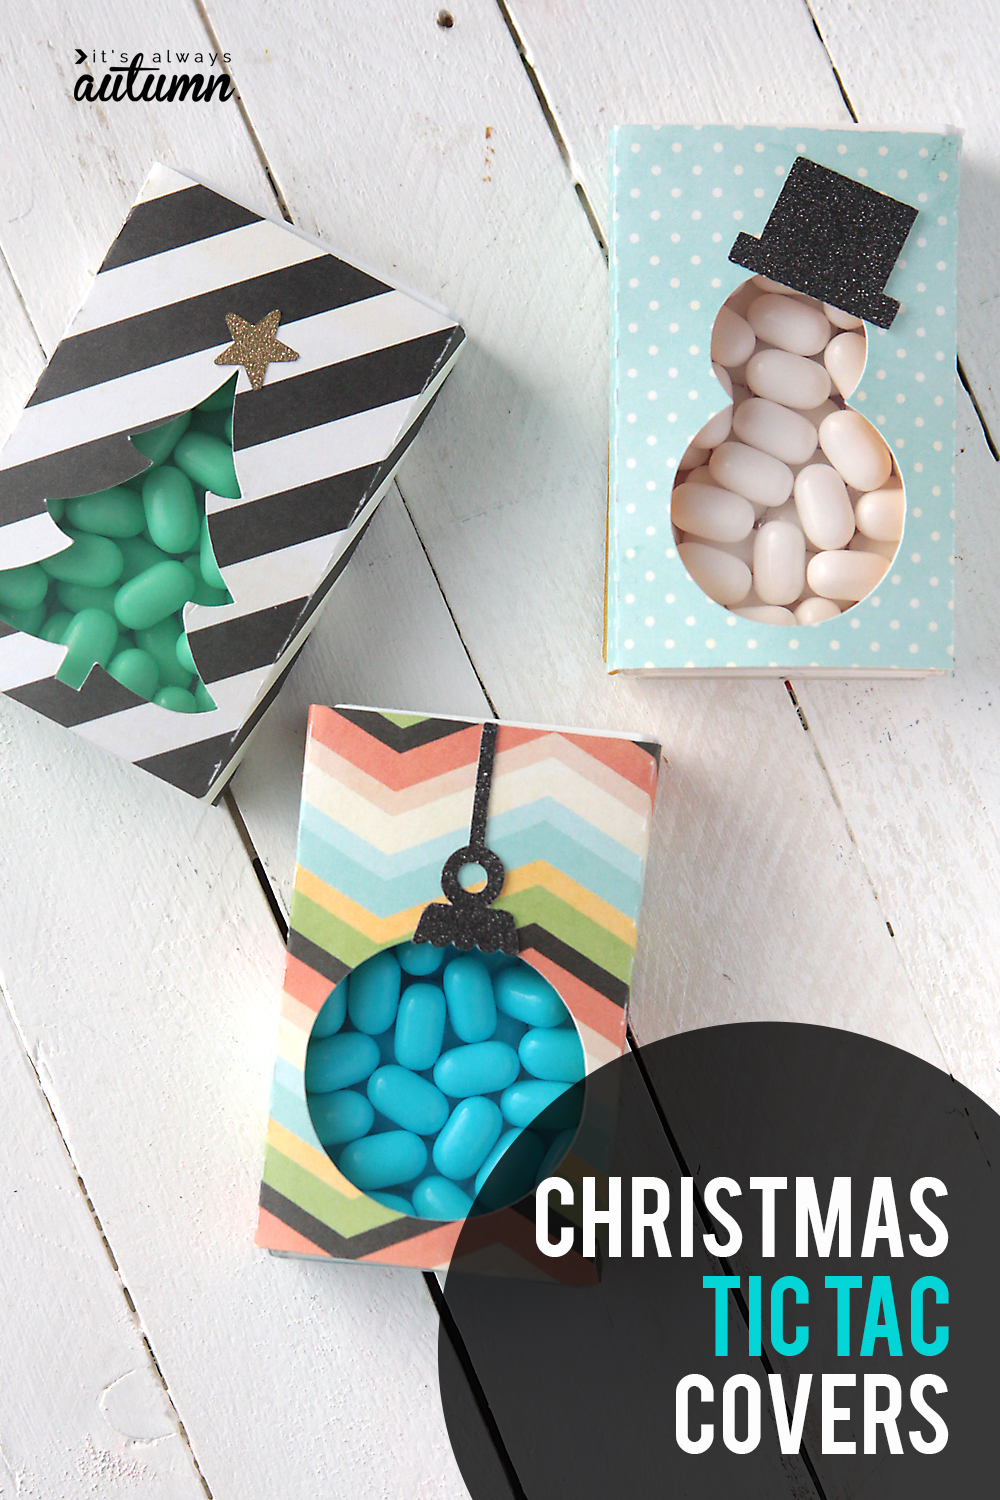 Cute little Christmas tic tac covers turn a package of mints into an adorable Christmas gift!